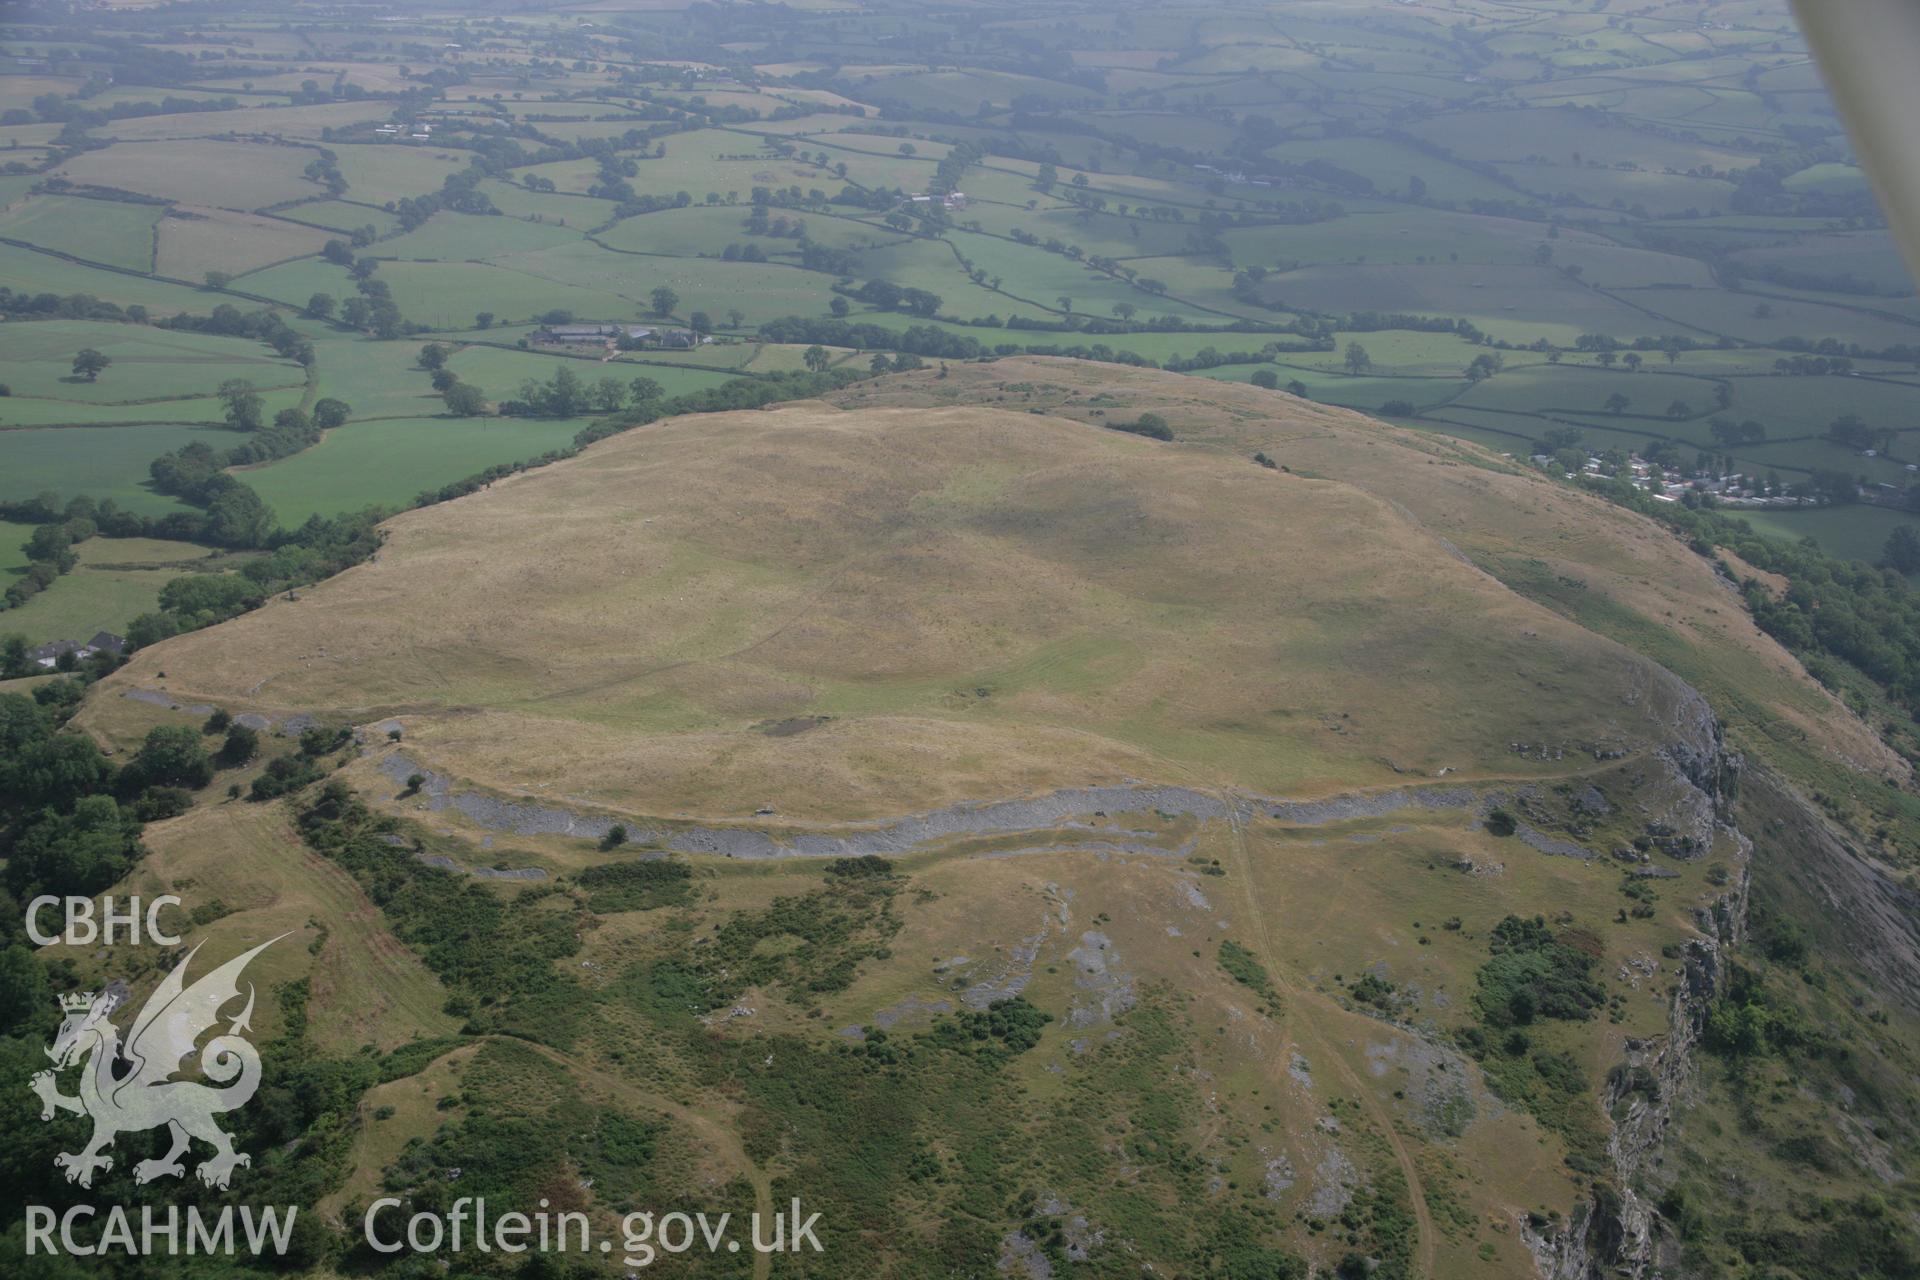 RCAHMW colour oblique aerial photograph of Pen-y-Corddyn-Mawr, Abergele. Taken on 14 August 2006 by Toby Driver.